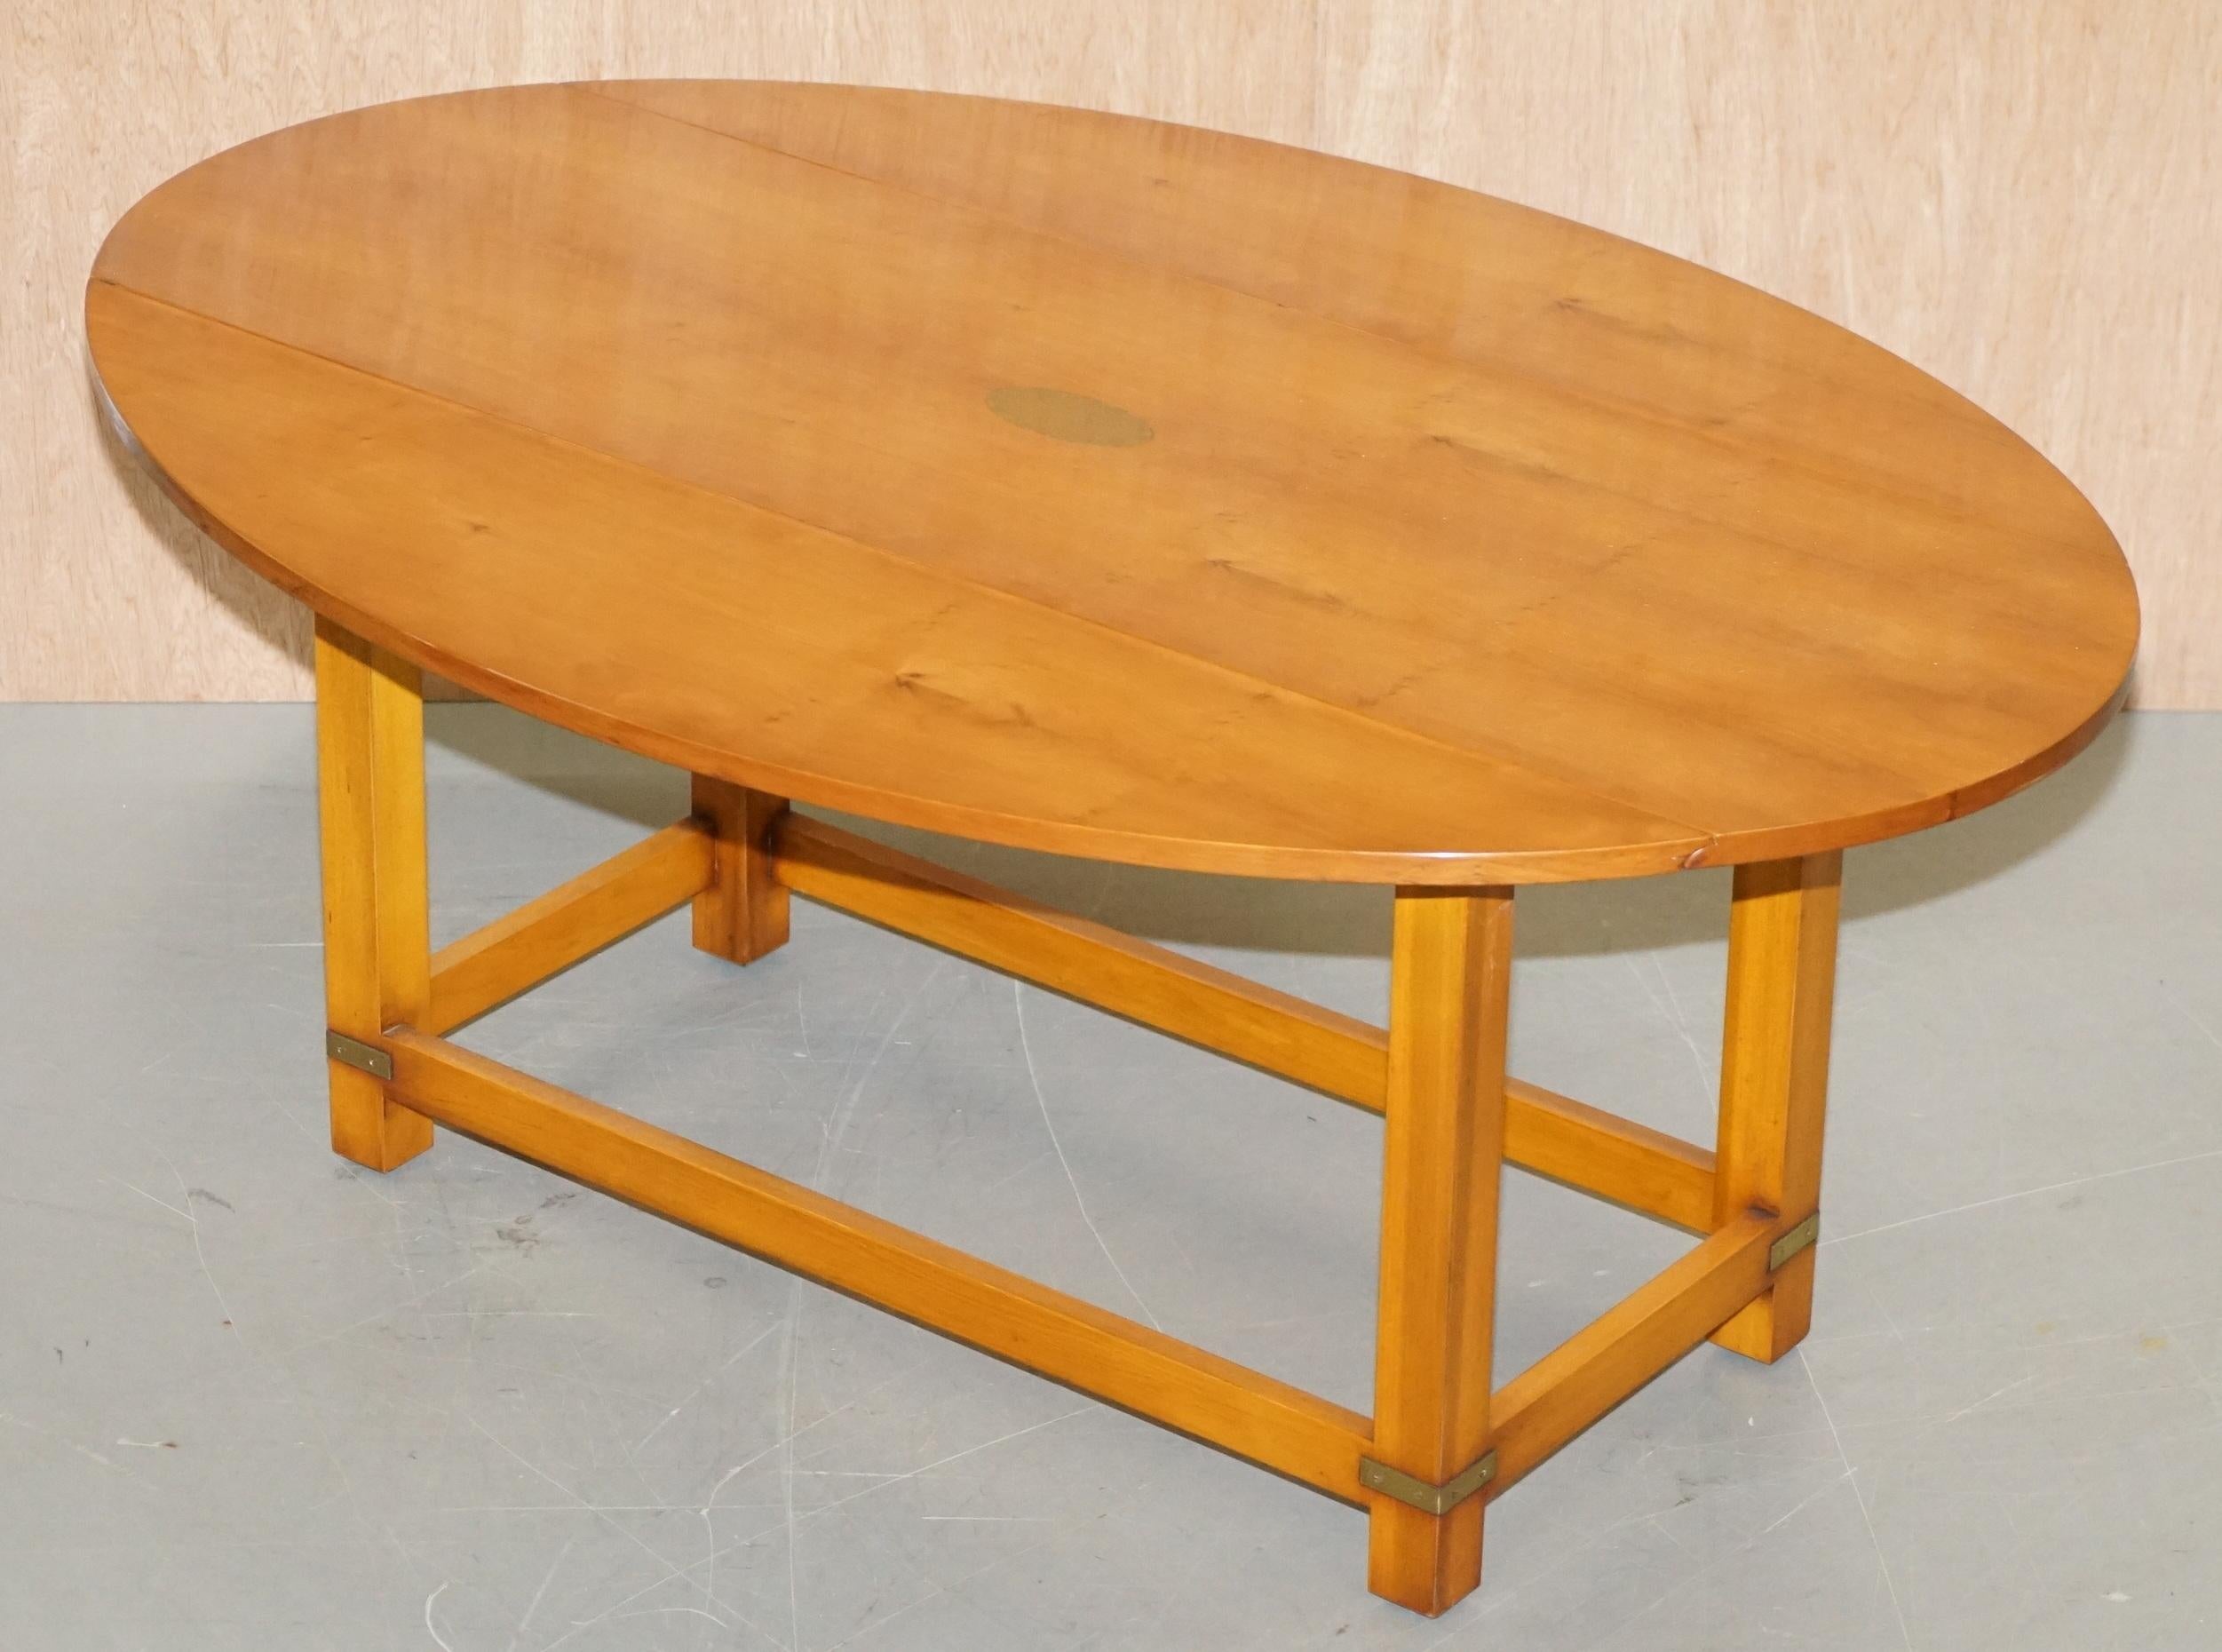 We are delighted to offer for sale this brand new handmade in England by Bevan Funnell, Burr Yew wood extending Military Campaign oval coffee table

This is a lovely and well-made piece by the genius’s at Bevan Funnell, the timber is burr yew wood